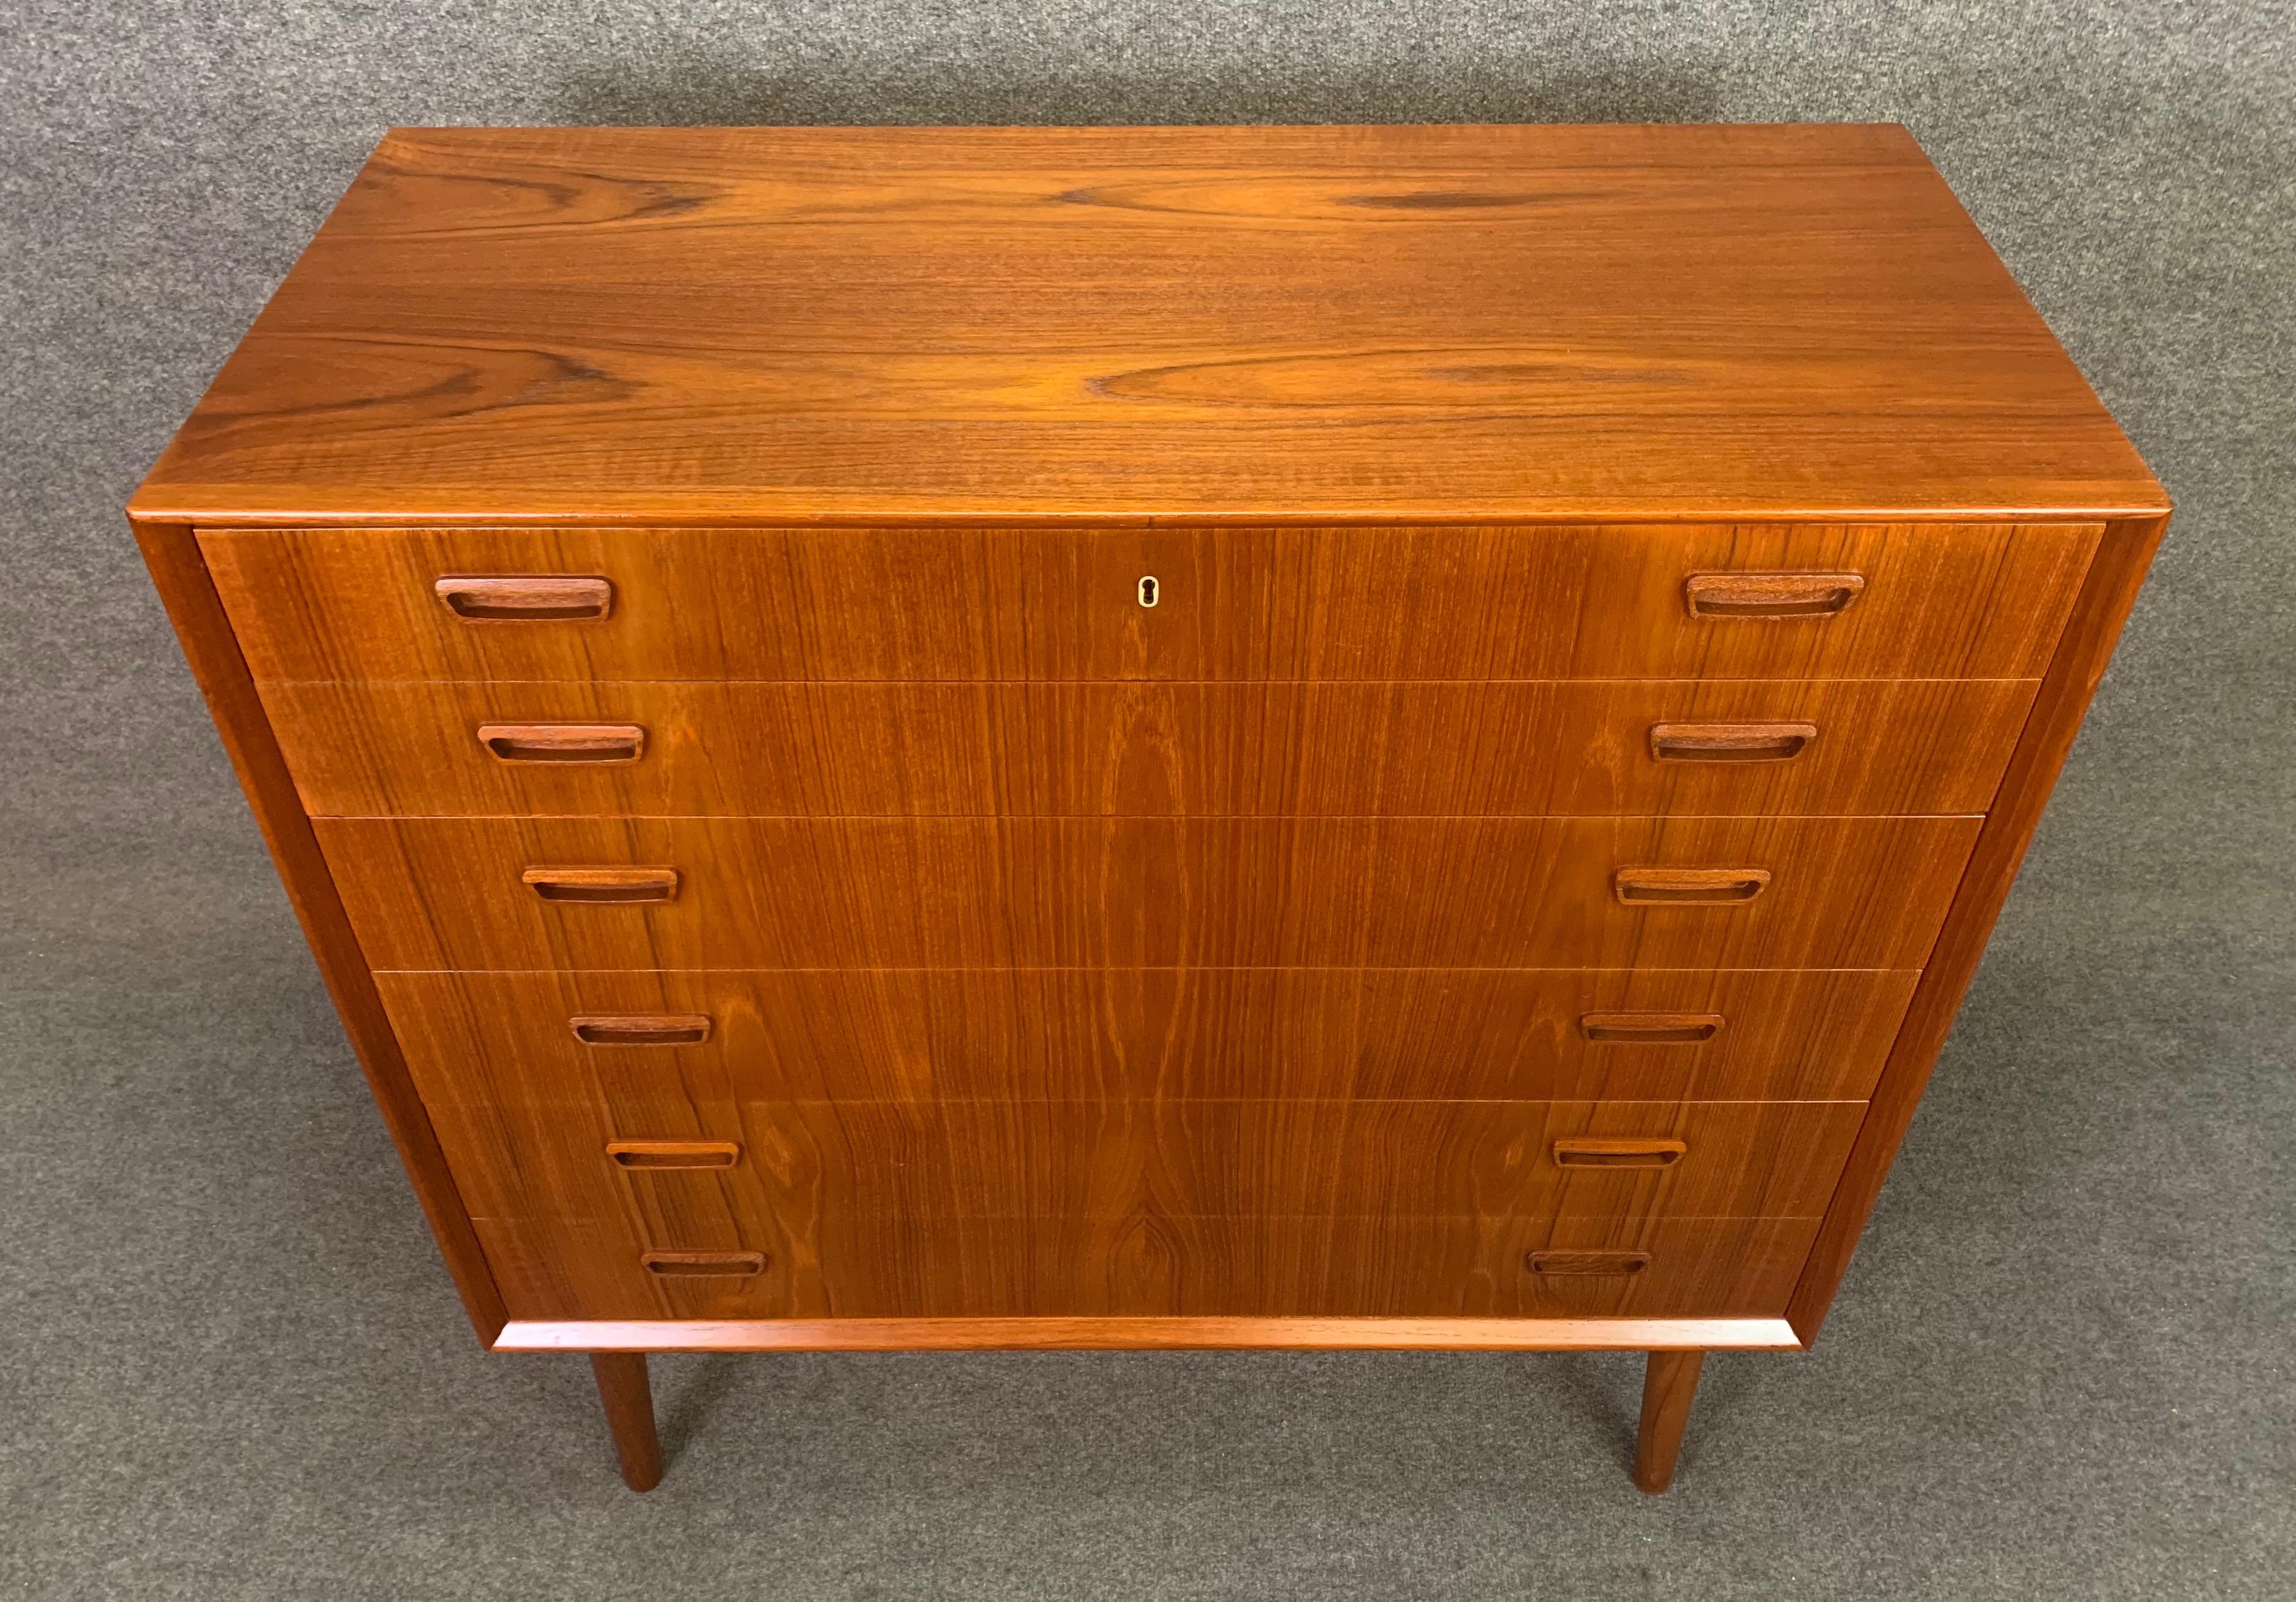 Here is a beautiful Scandinavian Modern teak highboy dresser designed by Borge Seindal and manufactured by P. Westergaards Mobelfabrik in Denmark in the 1960s.
This exquisite case piece, recently imported from Copenhagen to California before it’s